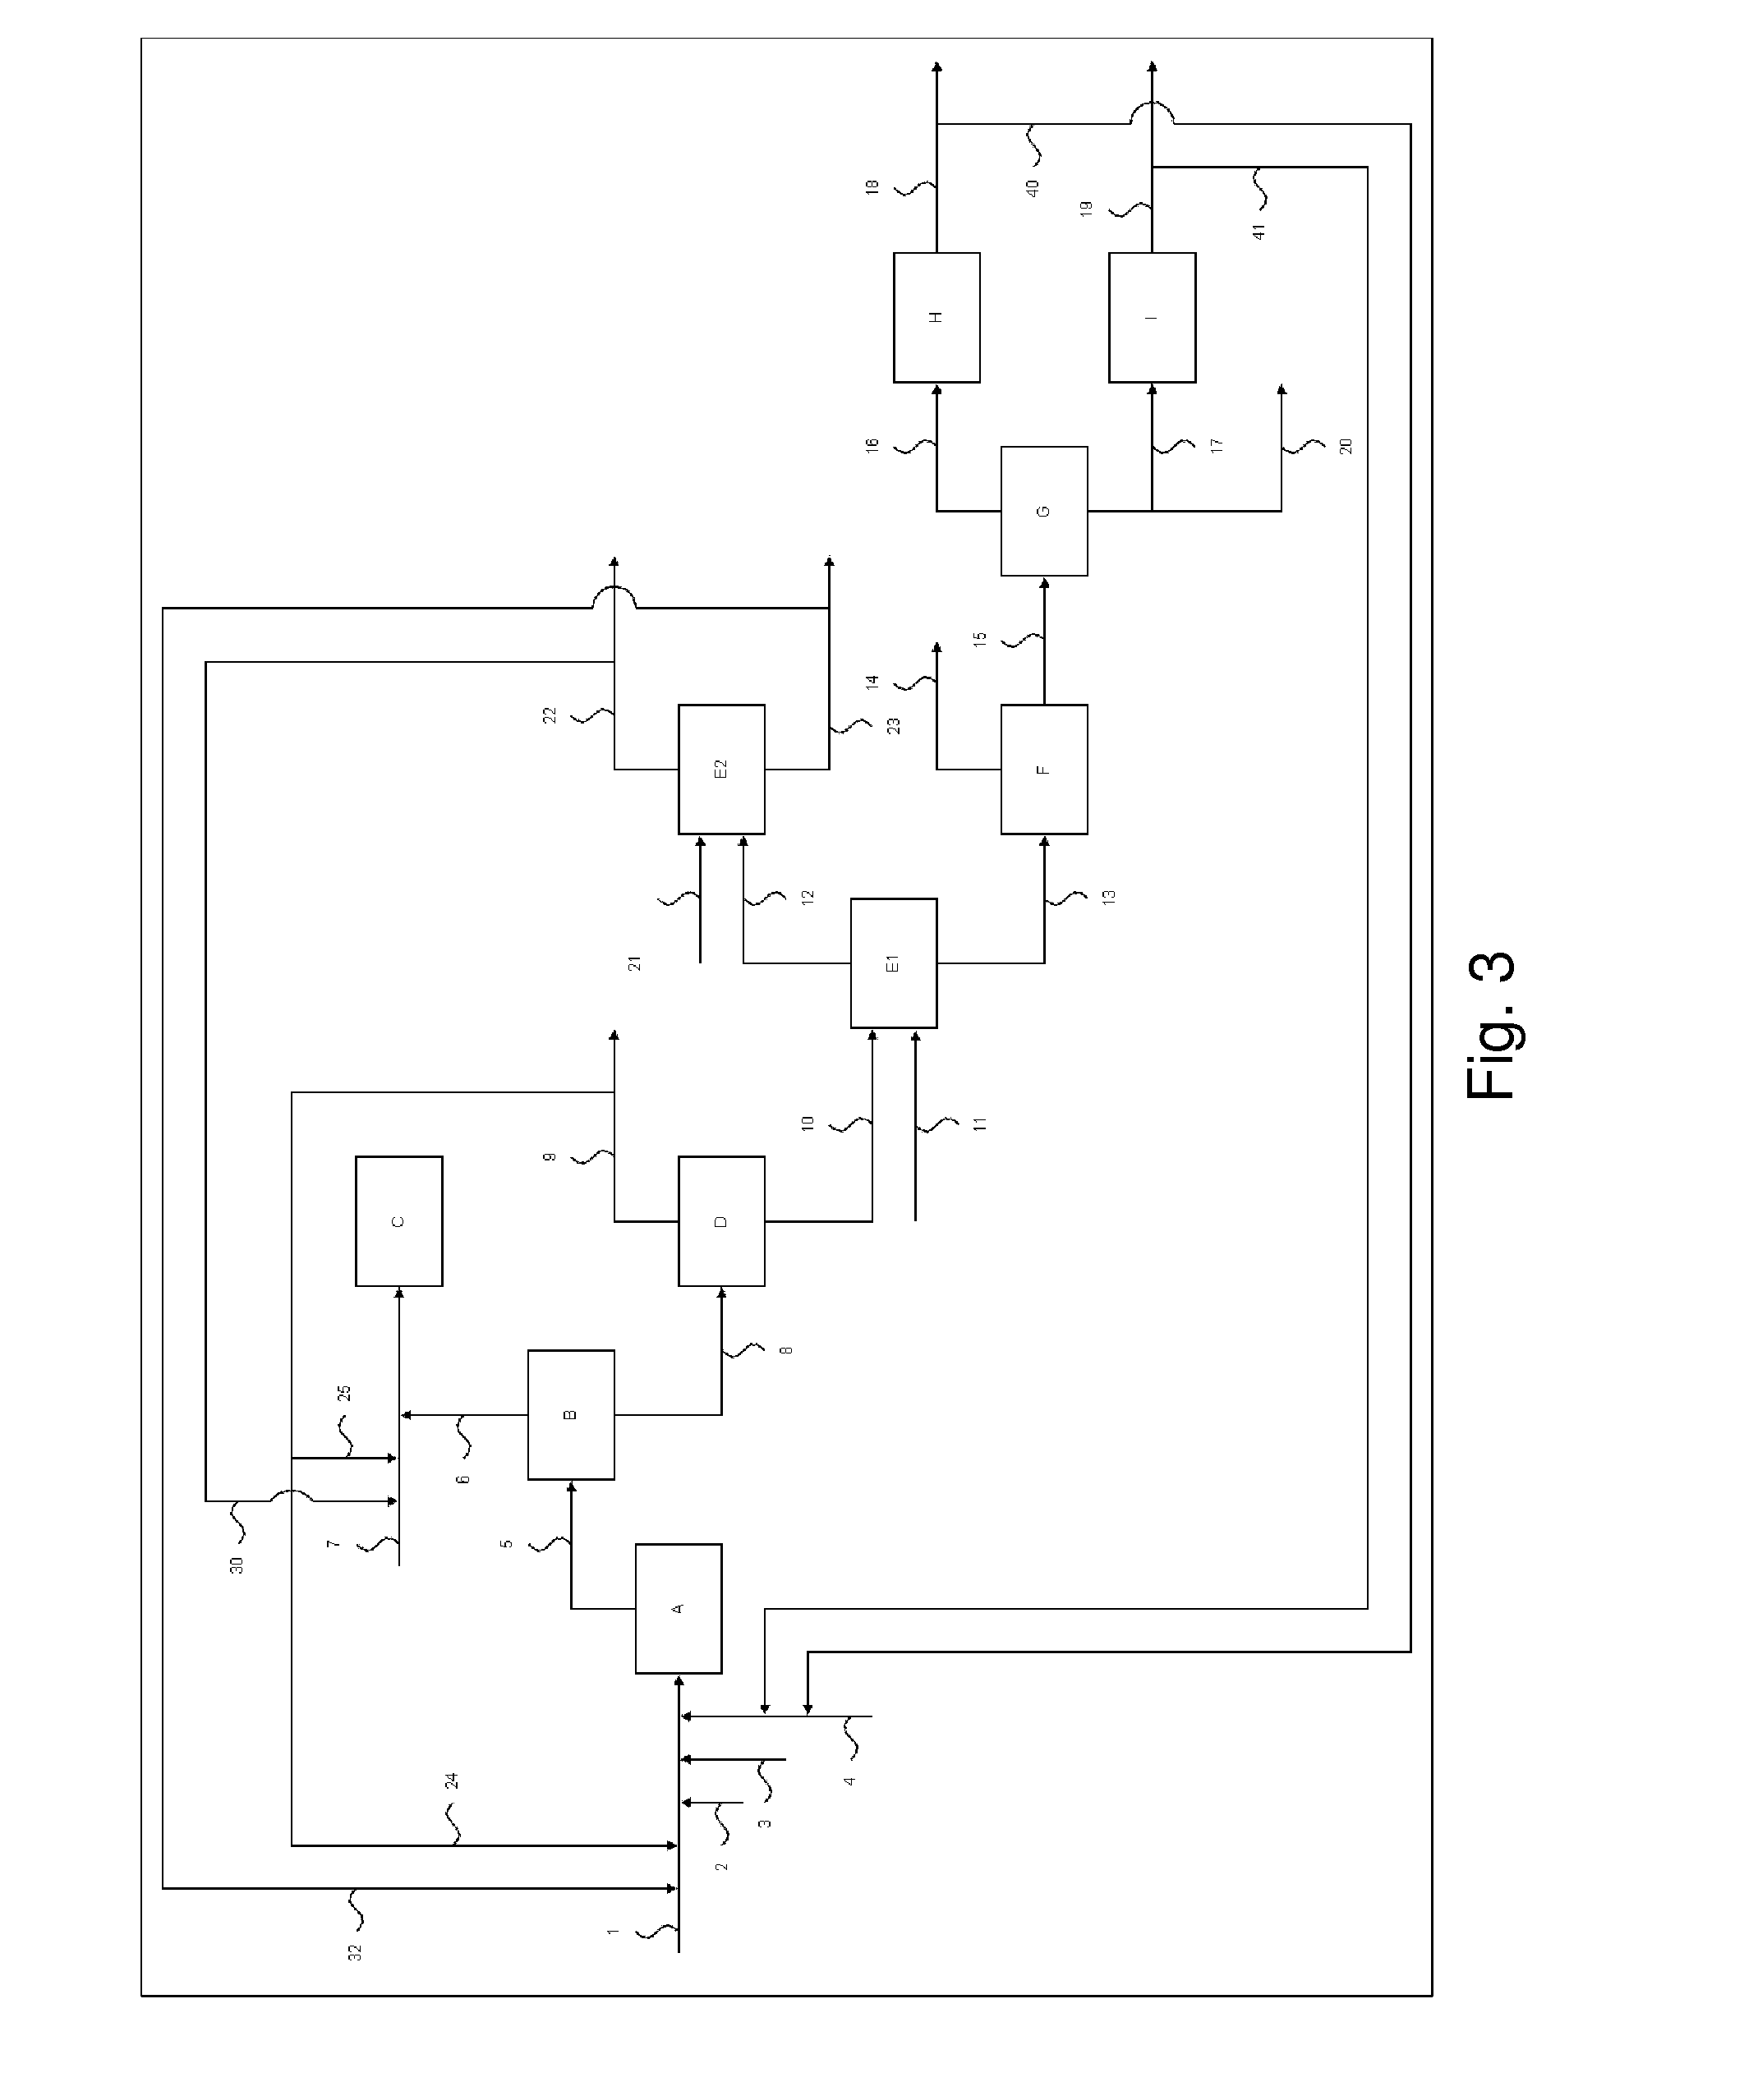 Method for the hydroconversion of oil feedstocks using slurry technology, allowing the recovery of metals from the catalyst and the feedstock, comprising an extraction step